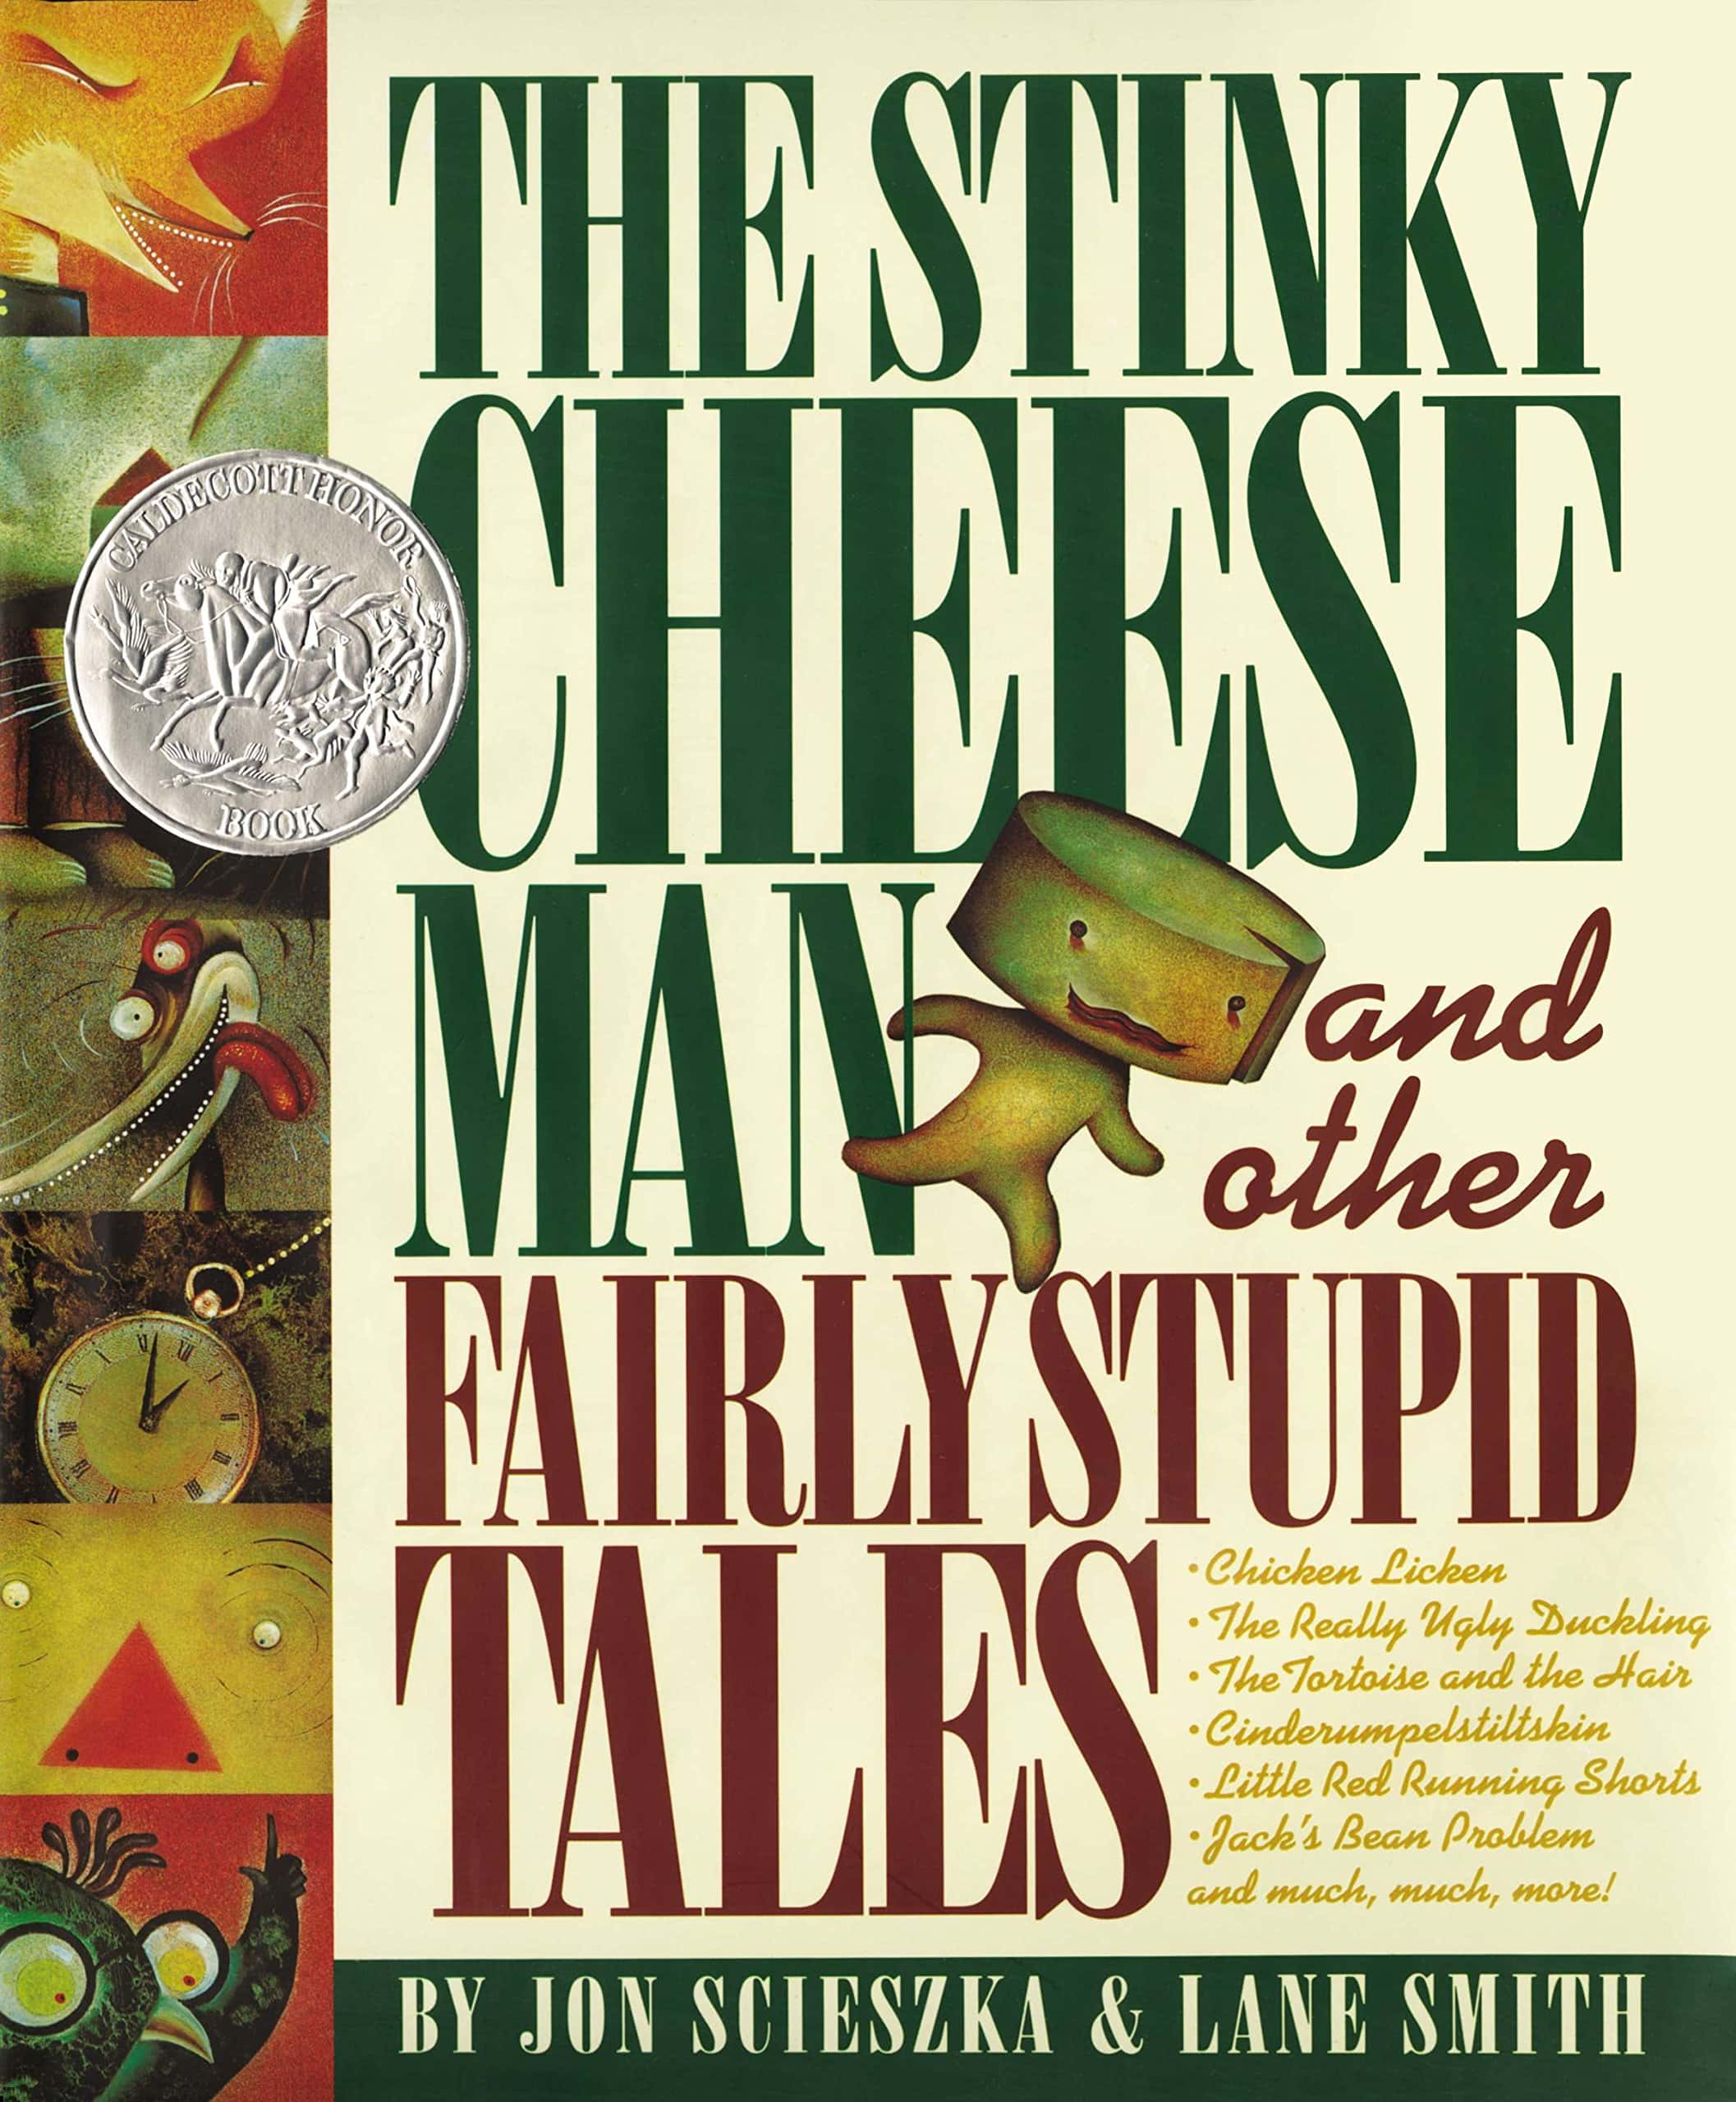 "The Stinky Cheeseman and Other Fairly Stupid Tales" by Jon Scieszka